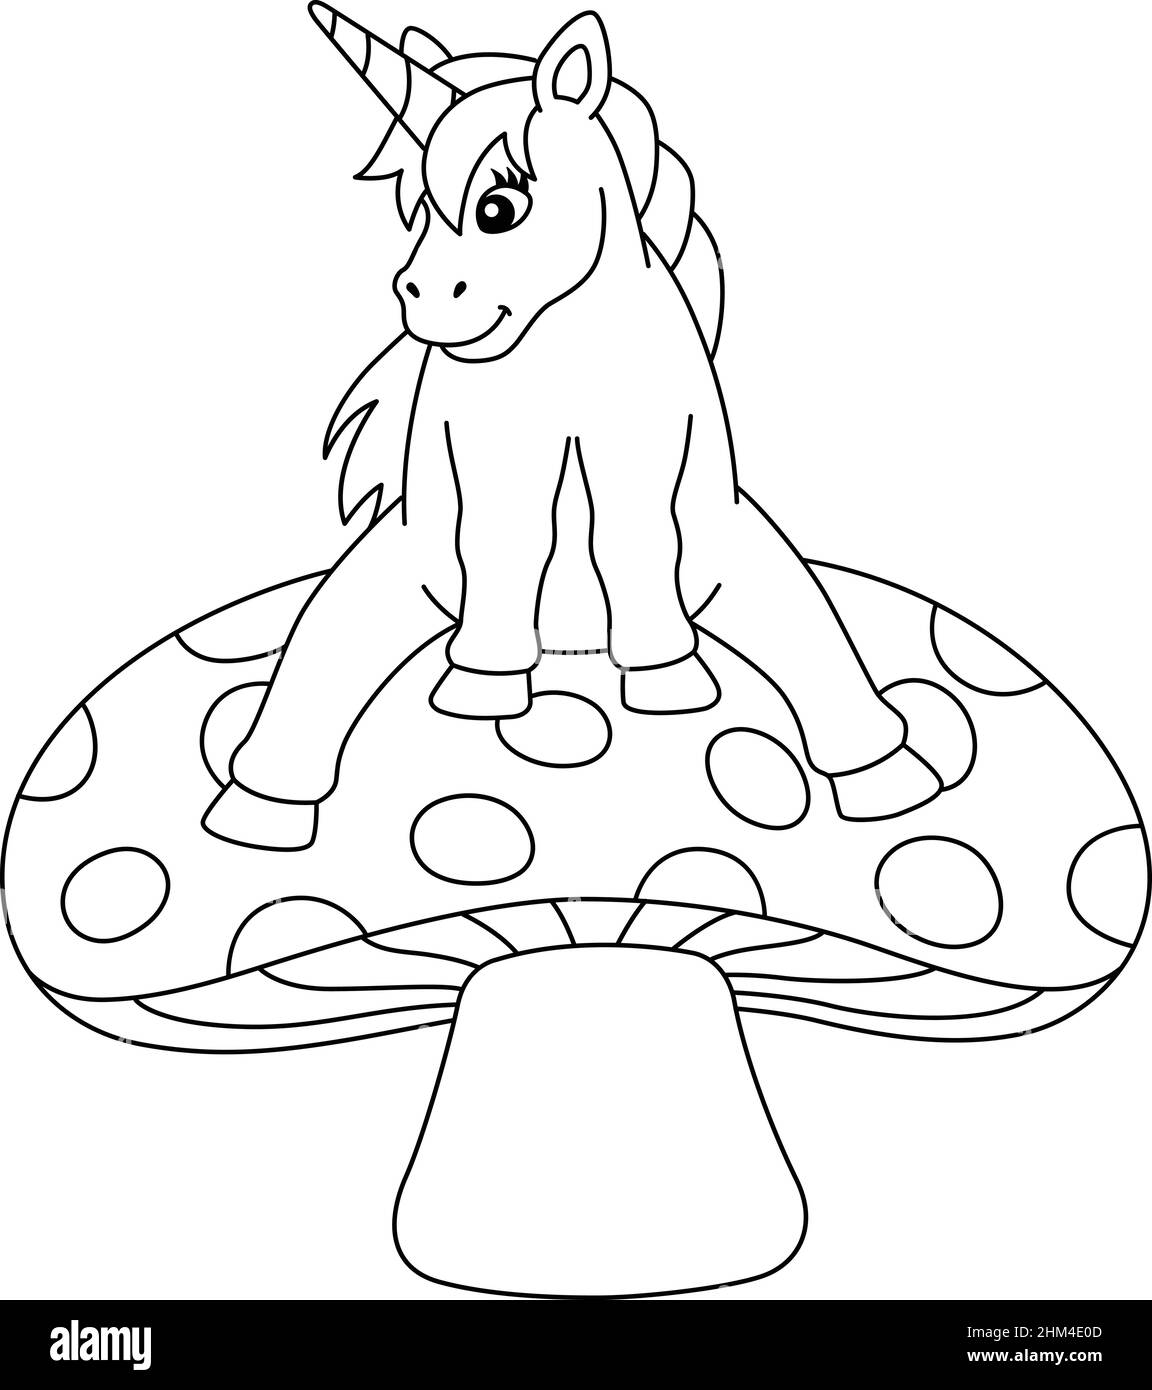 Unicorn Sitting On A Mushroom Coloring Isolated  Stock Vector